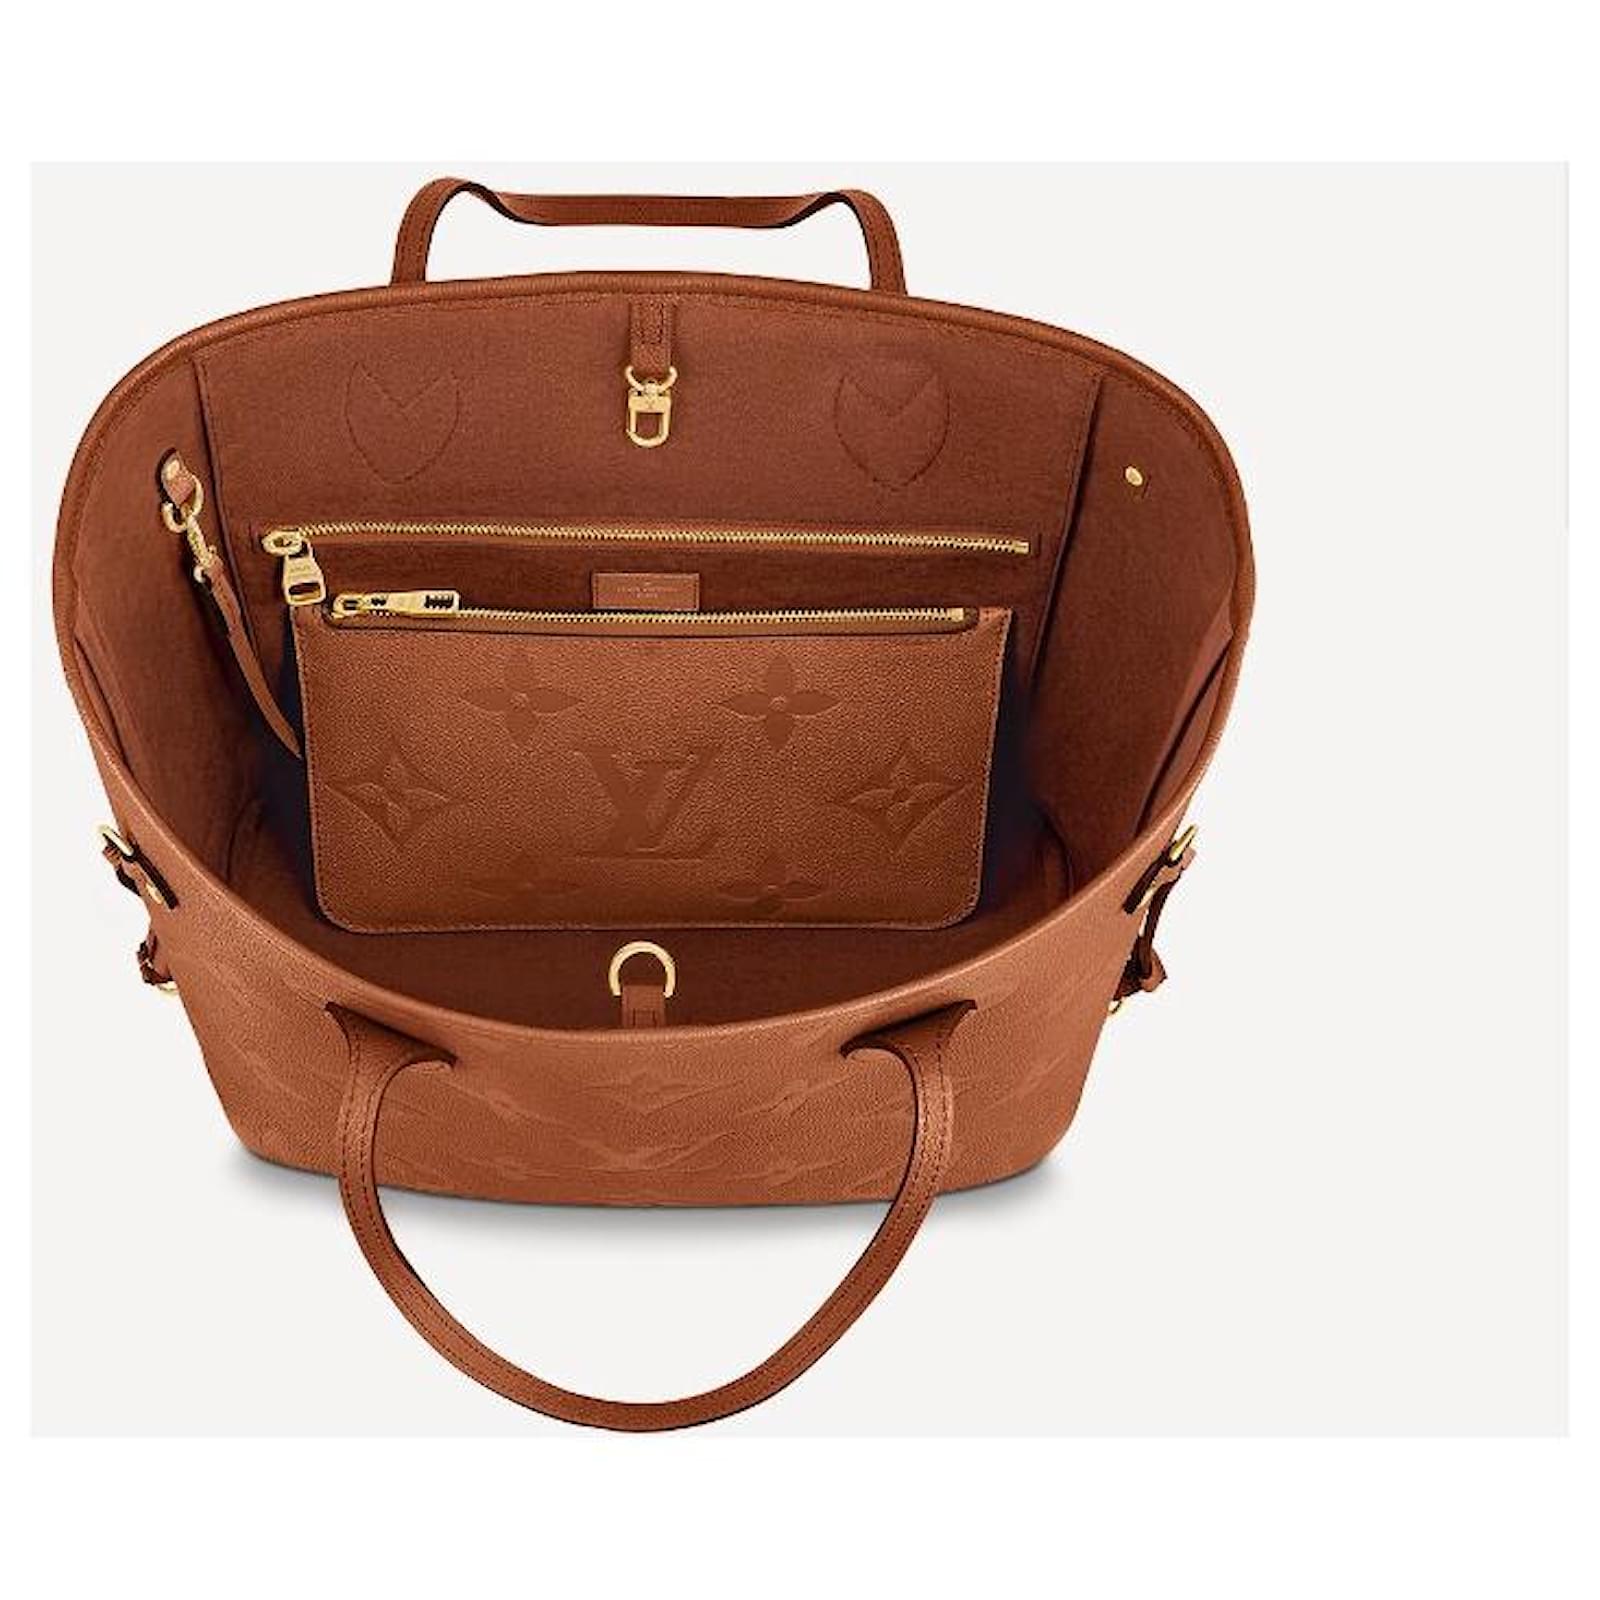 NEW RELEASE! LOUIS VUITTON NEVERFULL MM IN COGNAC (EMPREINTE LEATHER) 